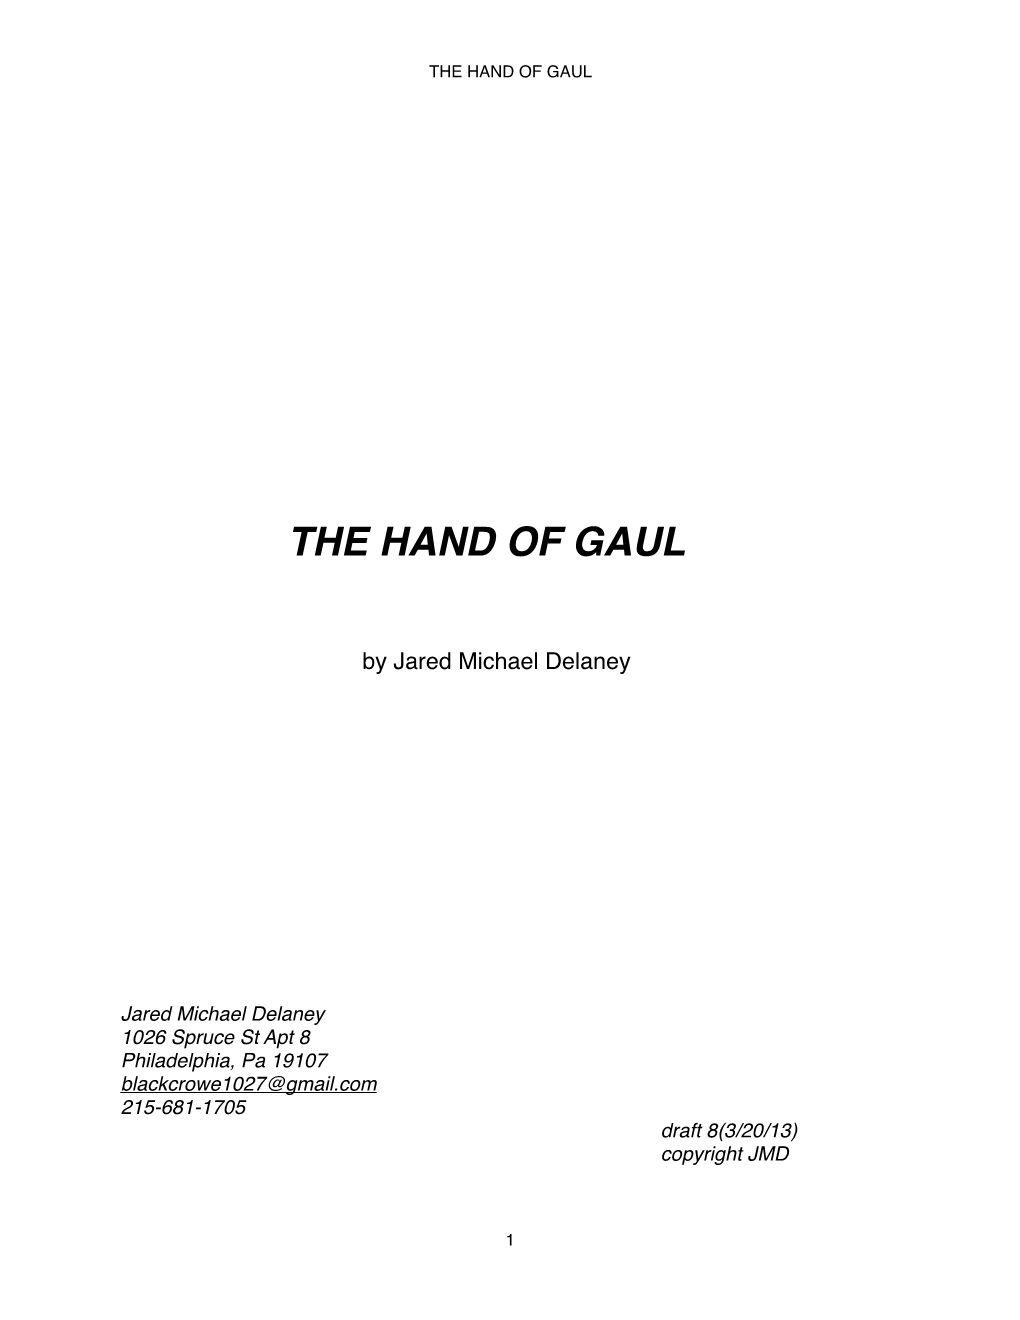 The Hand of Gaul 2